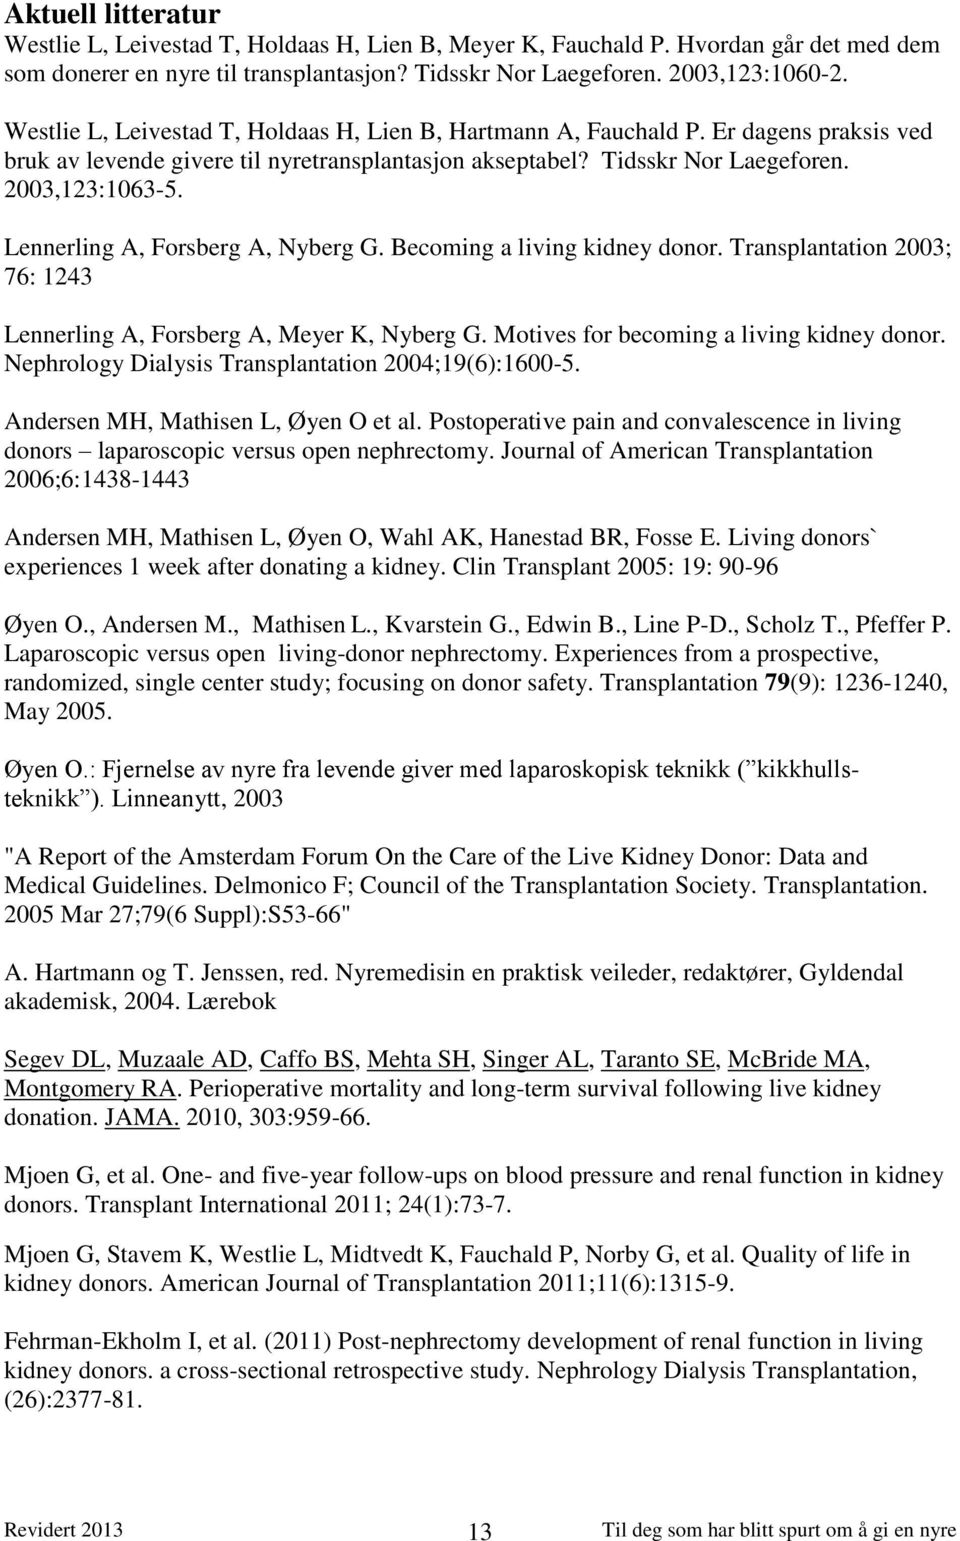 Lennerling A, Forsberg A, Nyberg G. Becoming a living kidney donor. Transplantation 2003; 76: 1243 Lennerling A, Forsberg A, Meyer K, Nyberg G. Motives for becoming a living kidney donor.